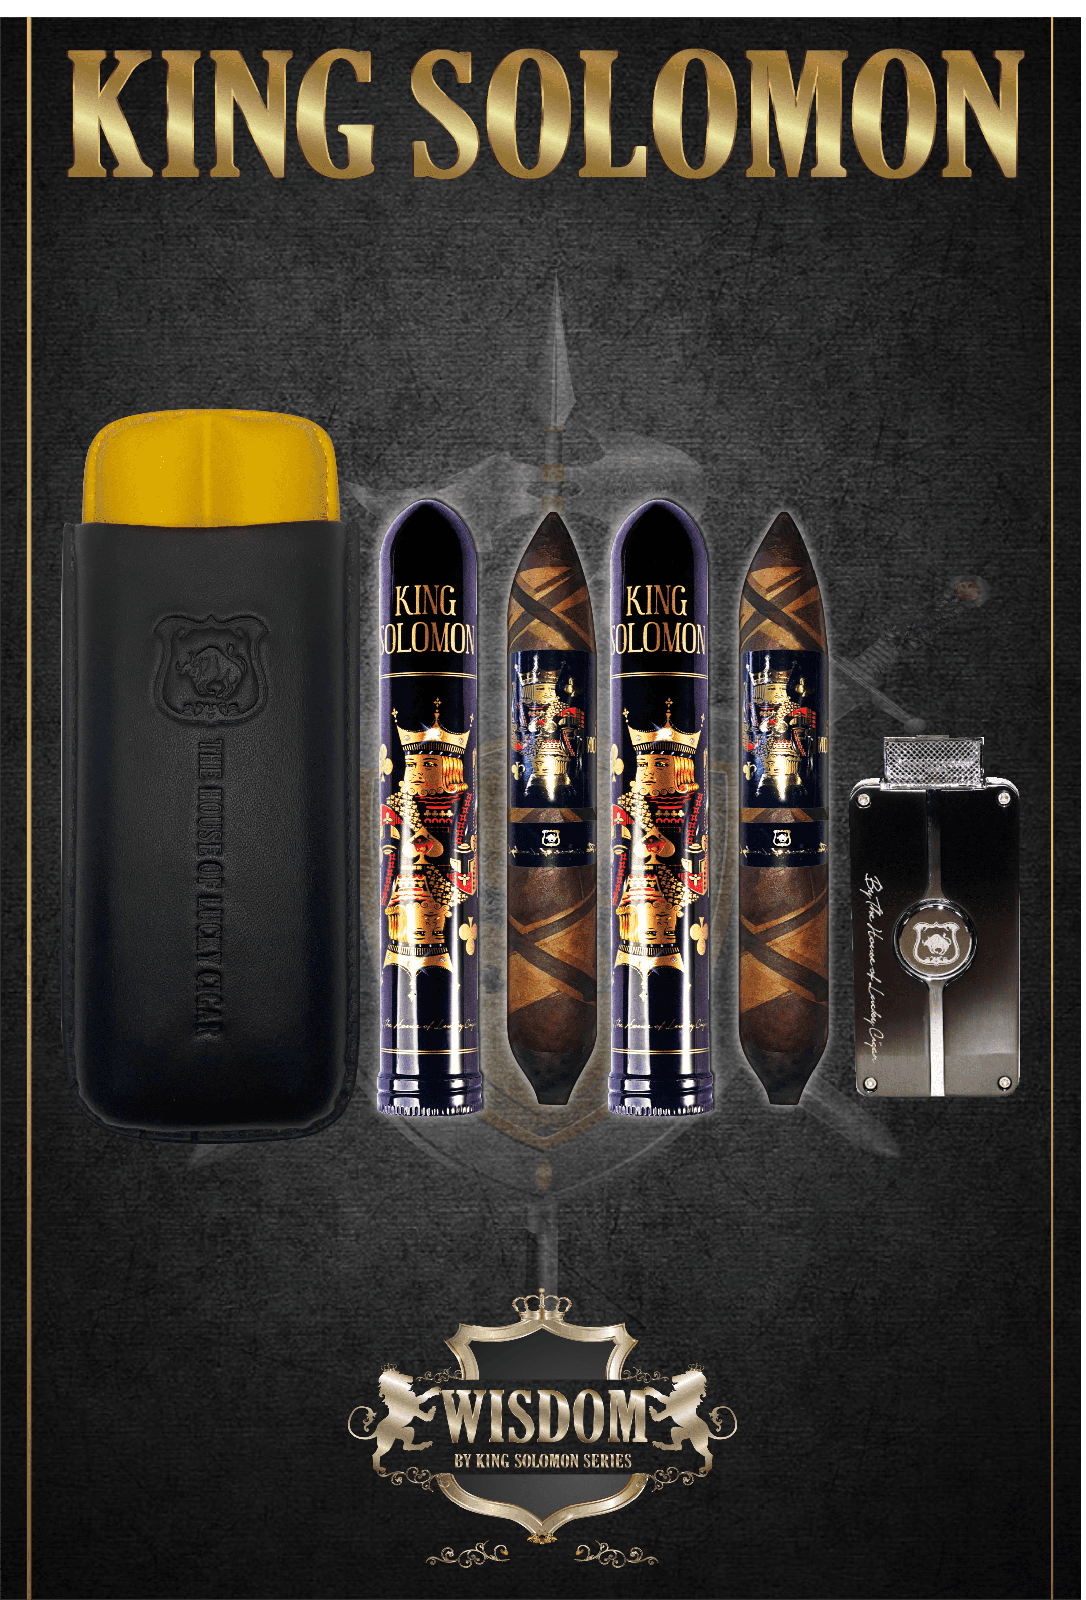 From The King Solomon Series: Set of 2 Solomon 7x60 Cigars with Torch and Travel Humidor